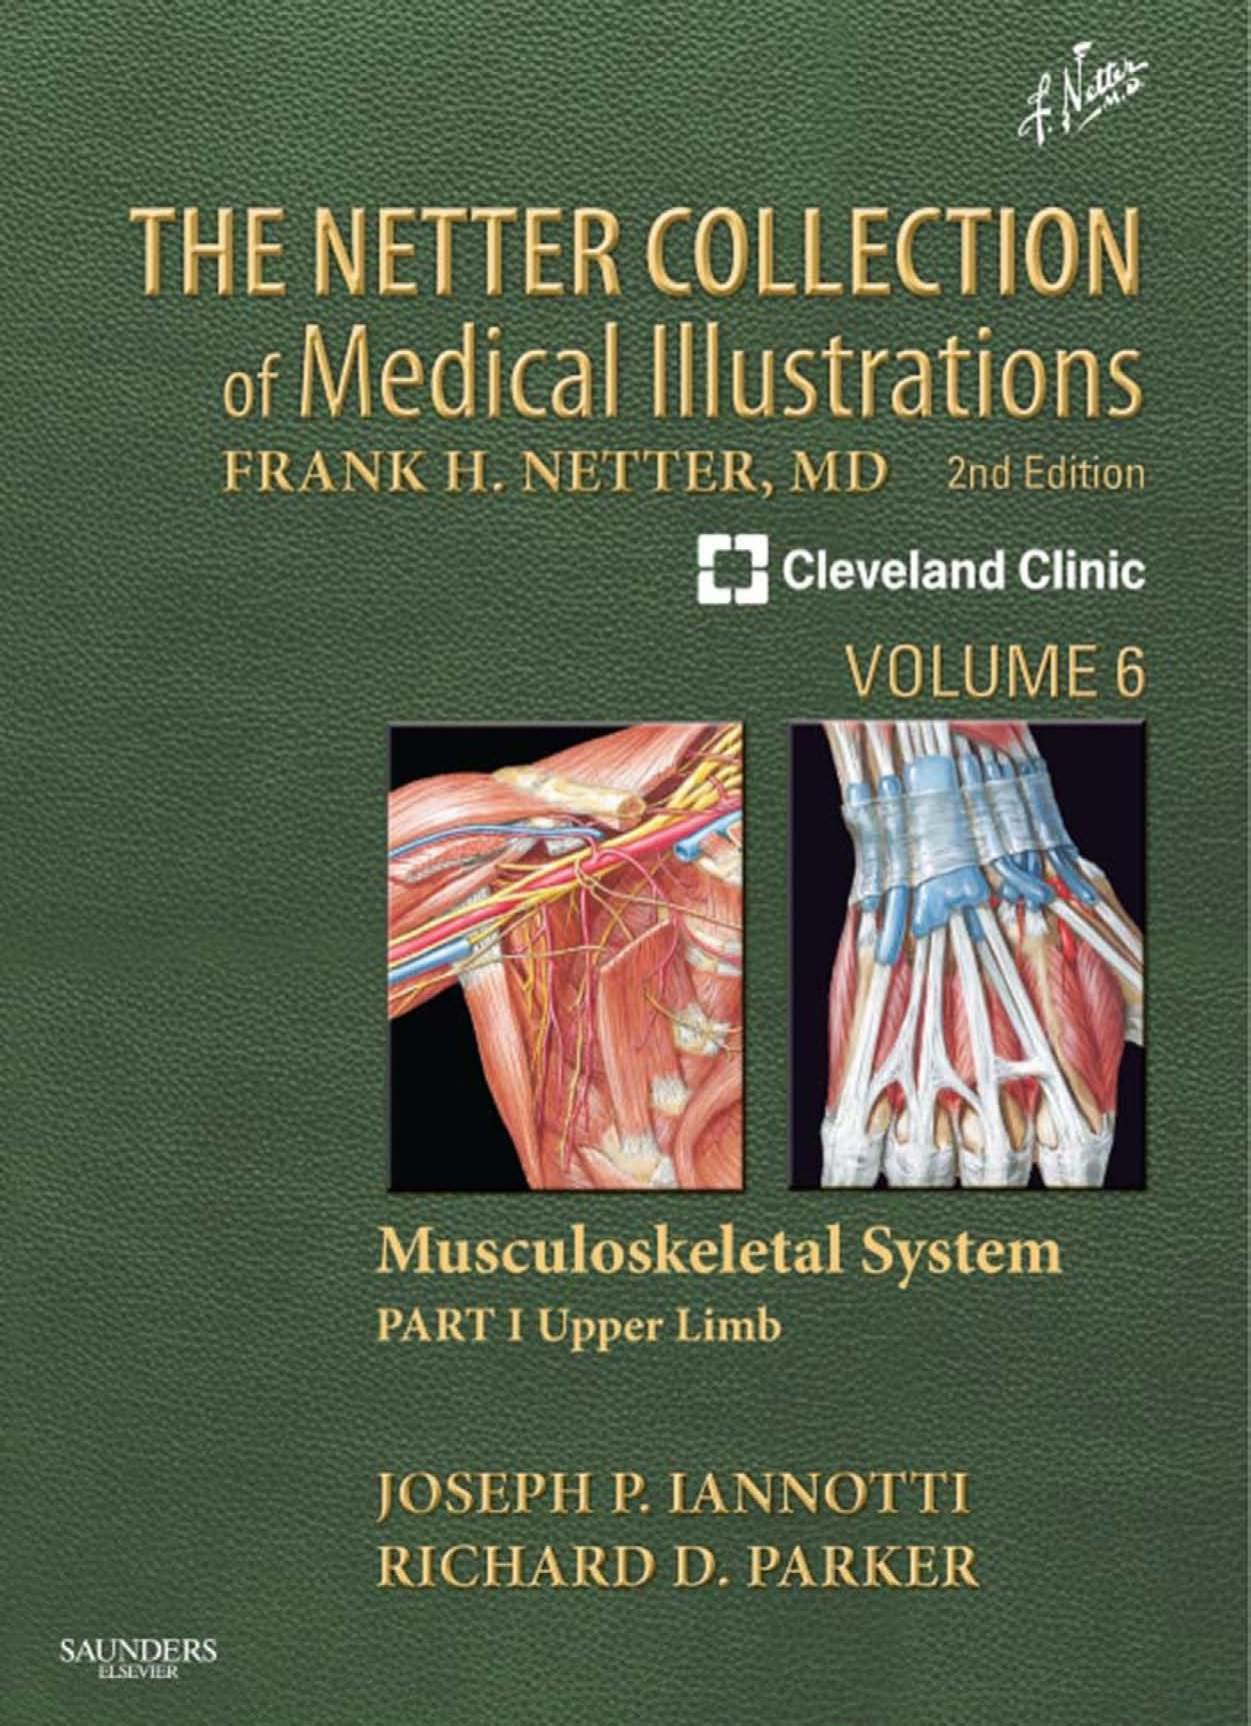 The Netter Collection of Medical Illustrations: Musculoskeletal System, Volume 6, Part I - Upper Limb by Machado Carlos A. G. Netter Frank H. Parker Richard D. Iannotti Joseph P